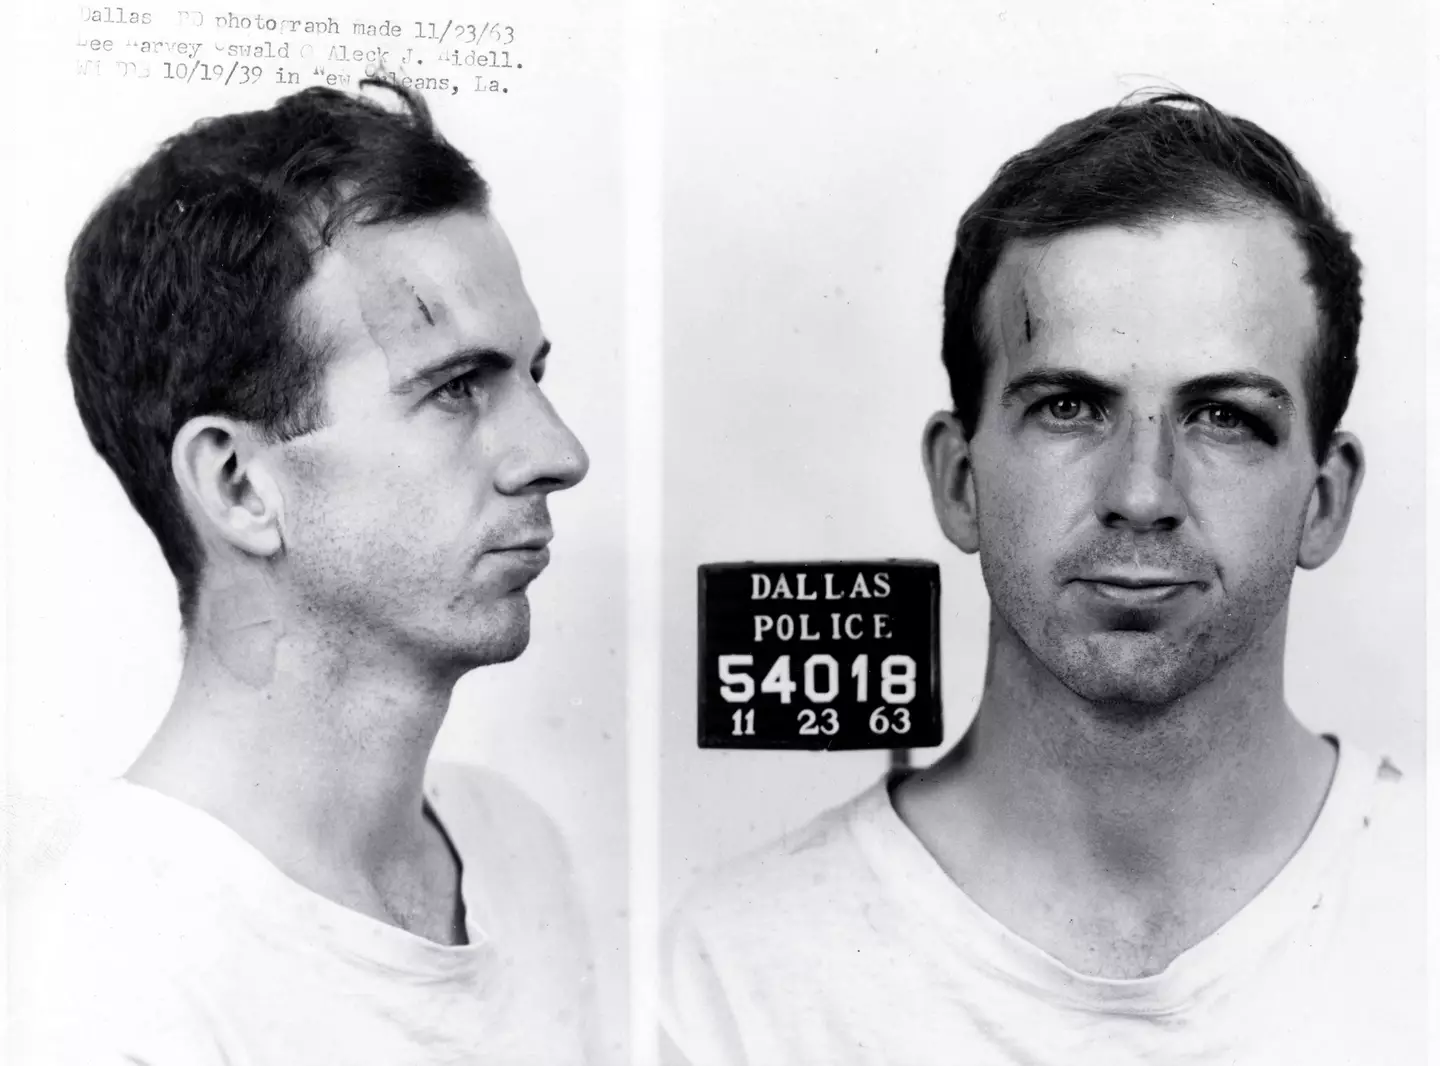 Hill insists Lee Harvery Oswald acted alone.